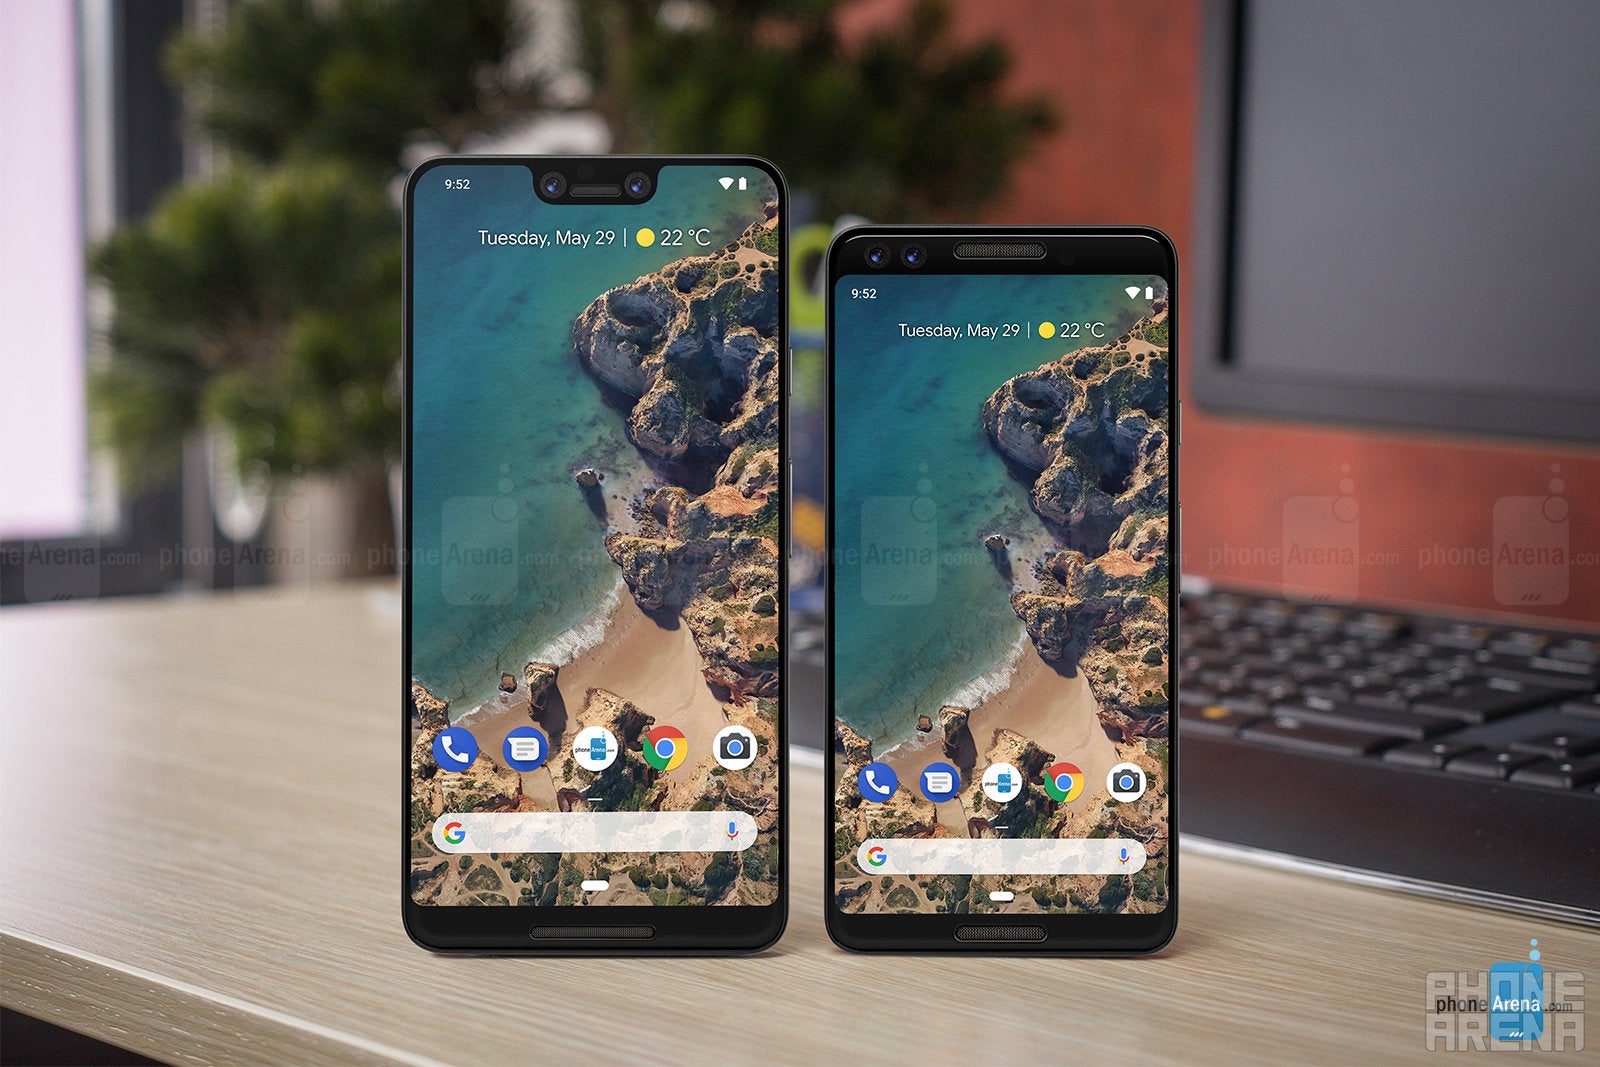 This is what the Pixel 3 and Pixel 3 XL could look like